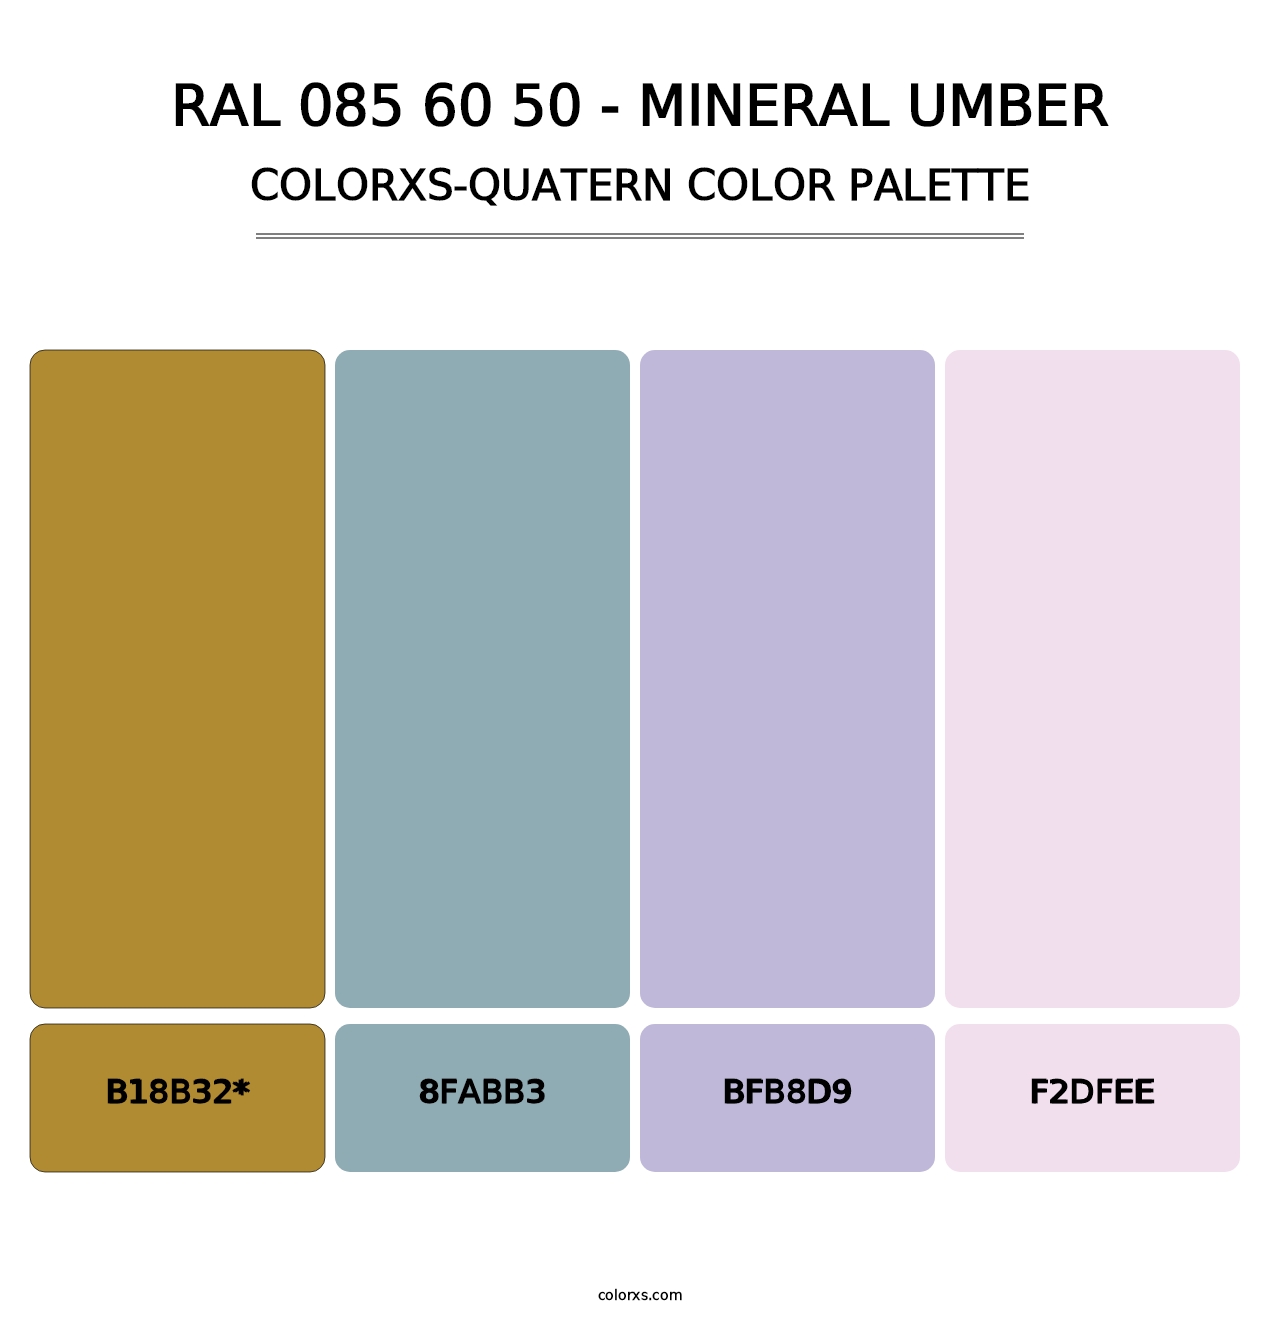 RAL 085 60 50 - Mineral Umber - Colorxs Quatern Palette